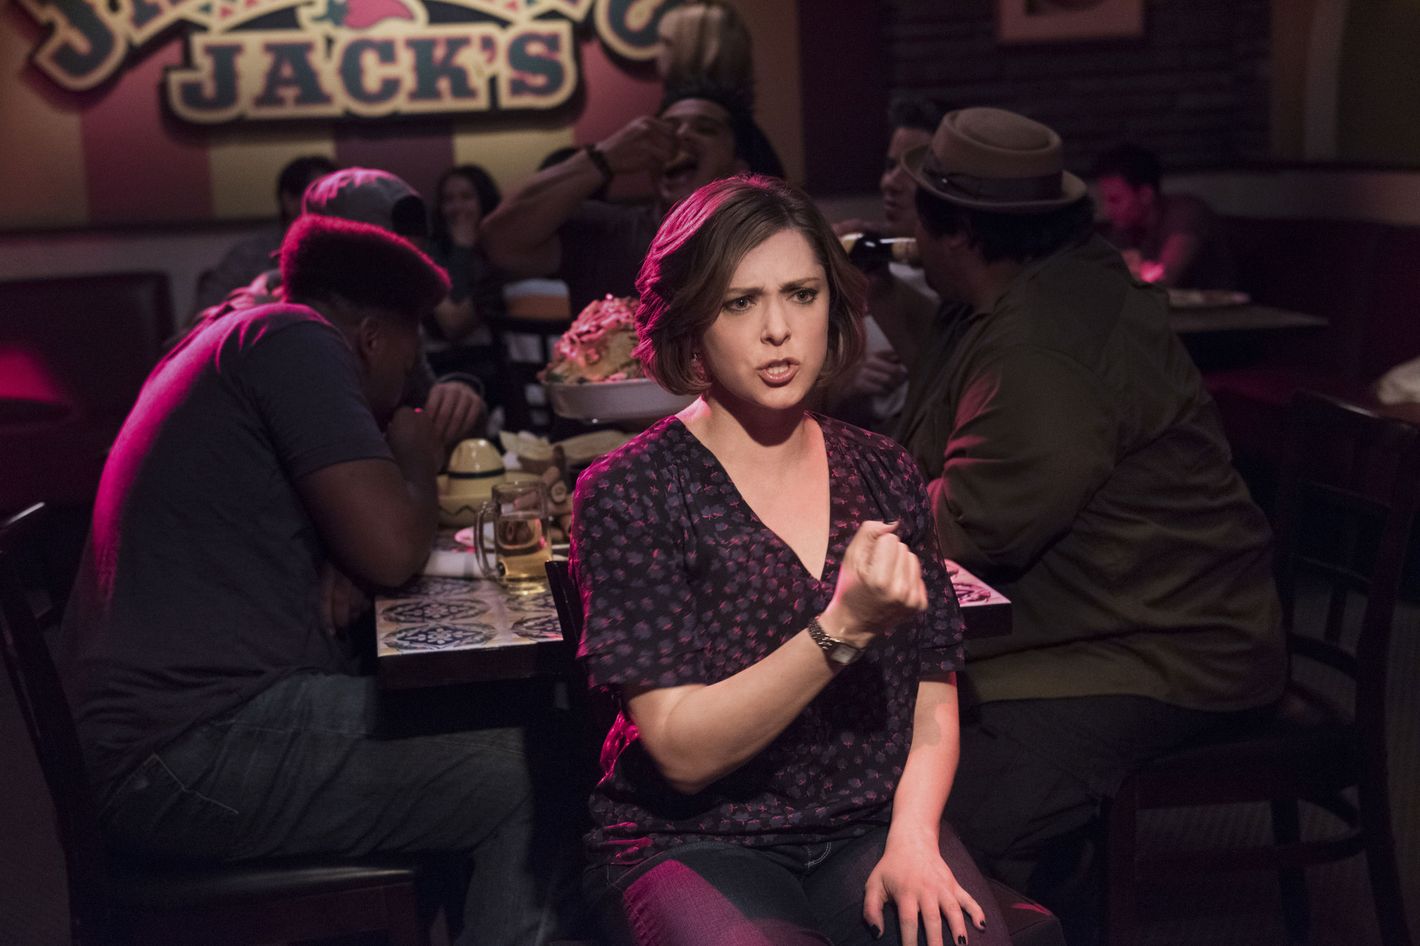 WATCH] 'Crazy Ex-Girlfriend' Sings About 'Heavy Boobs